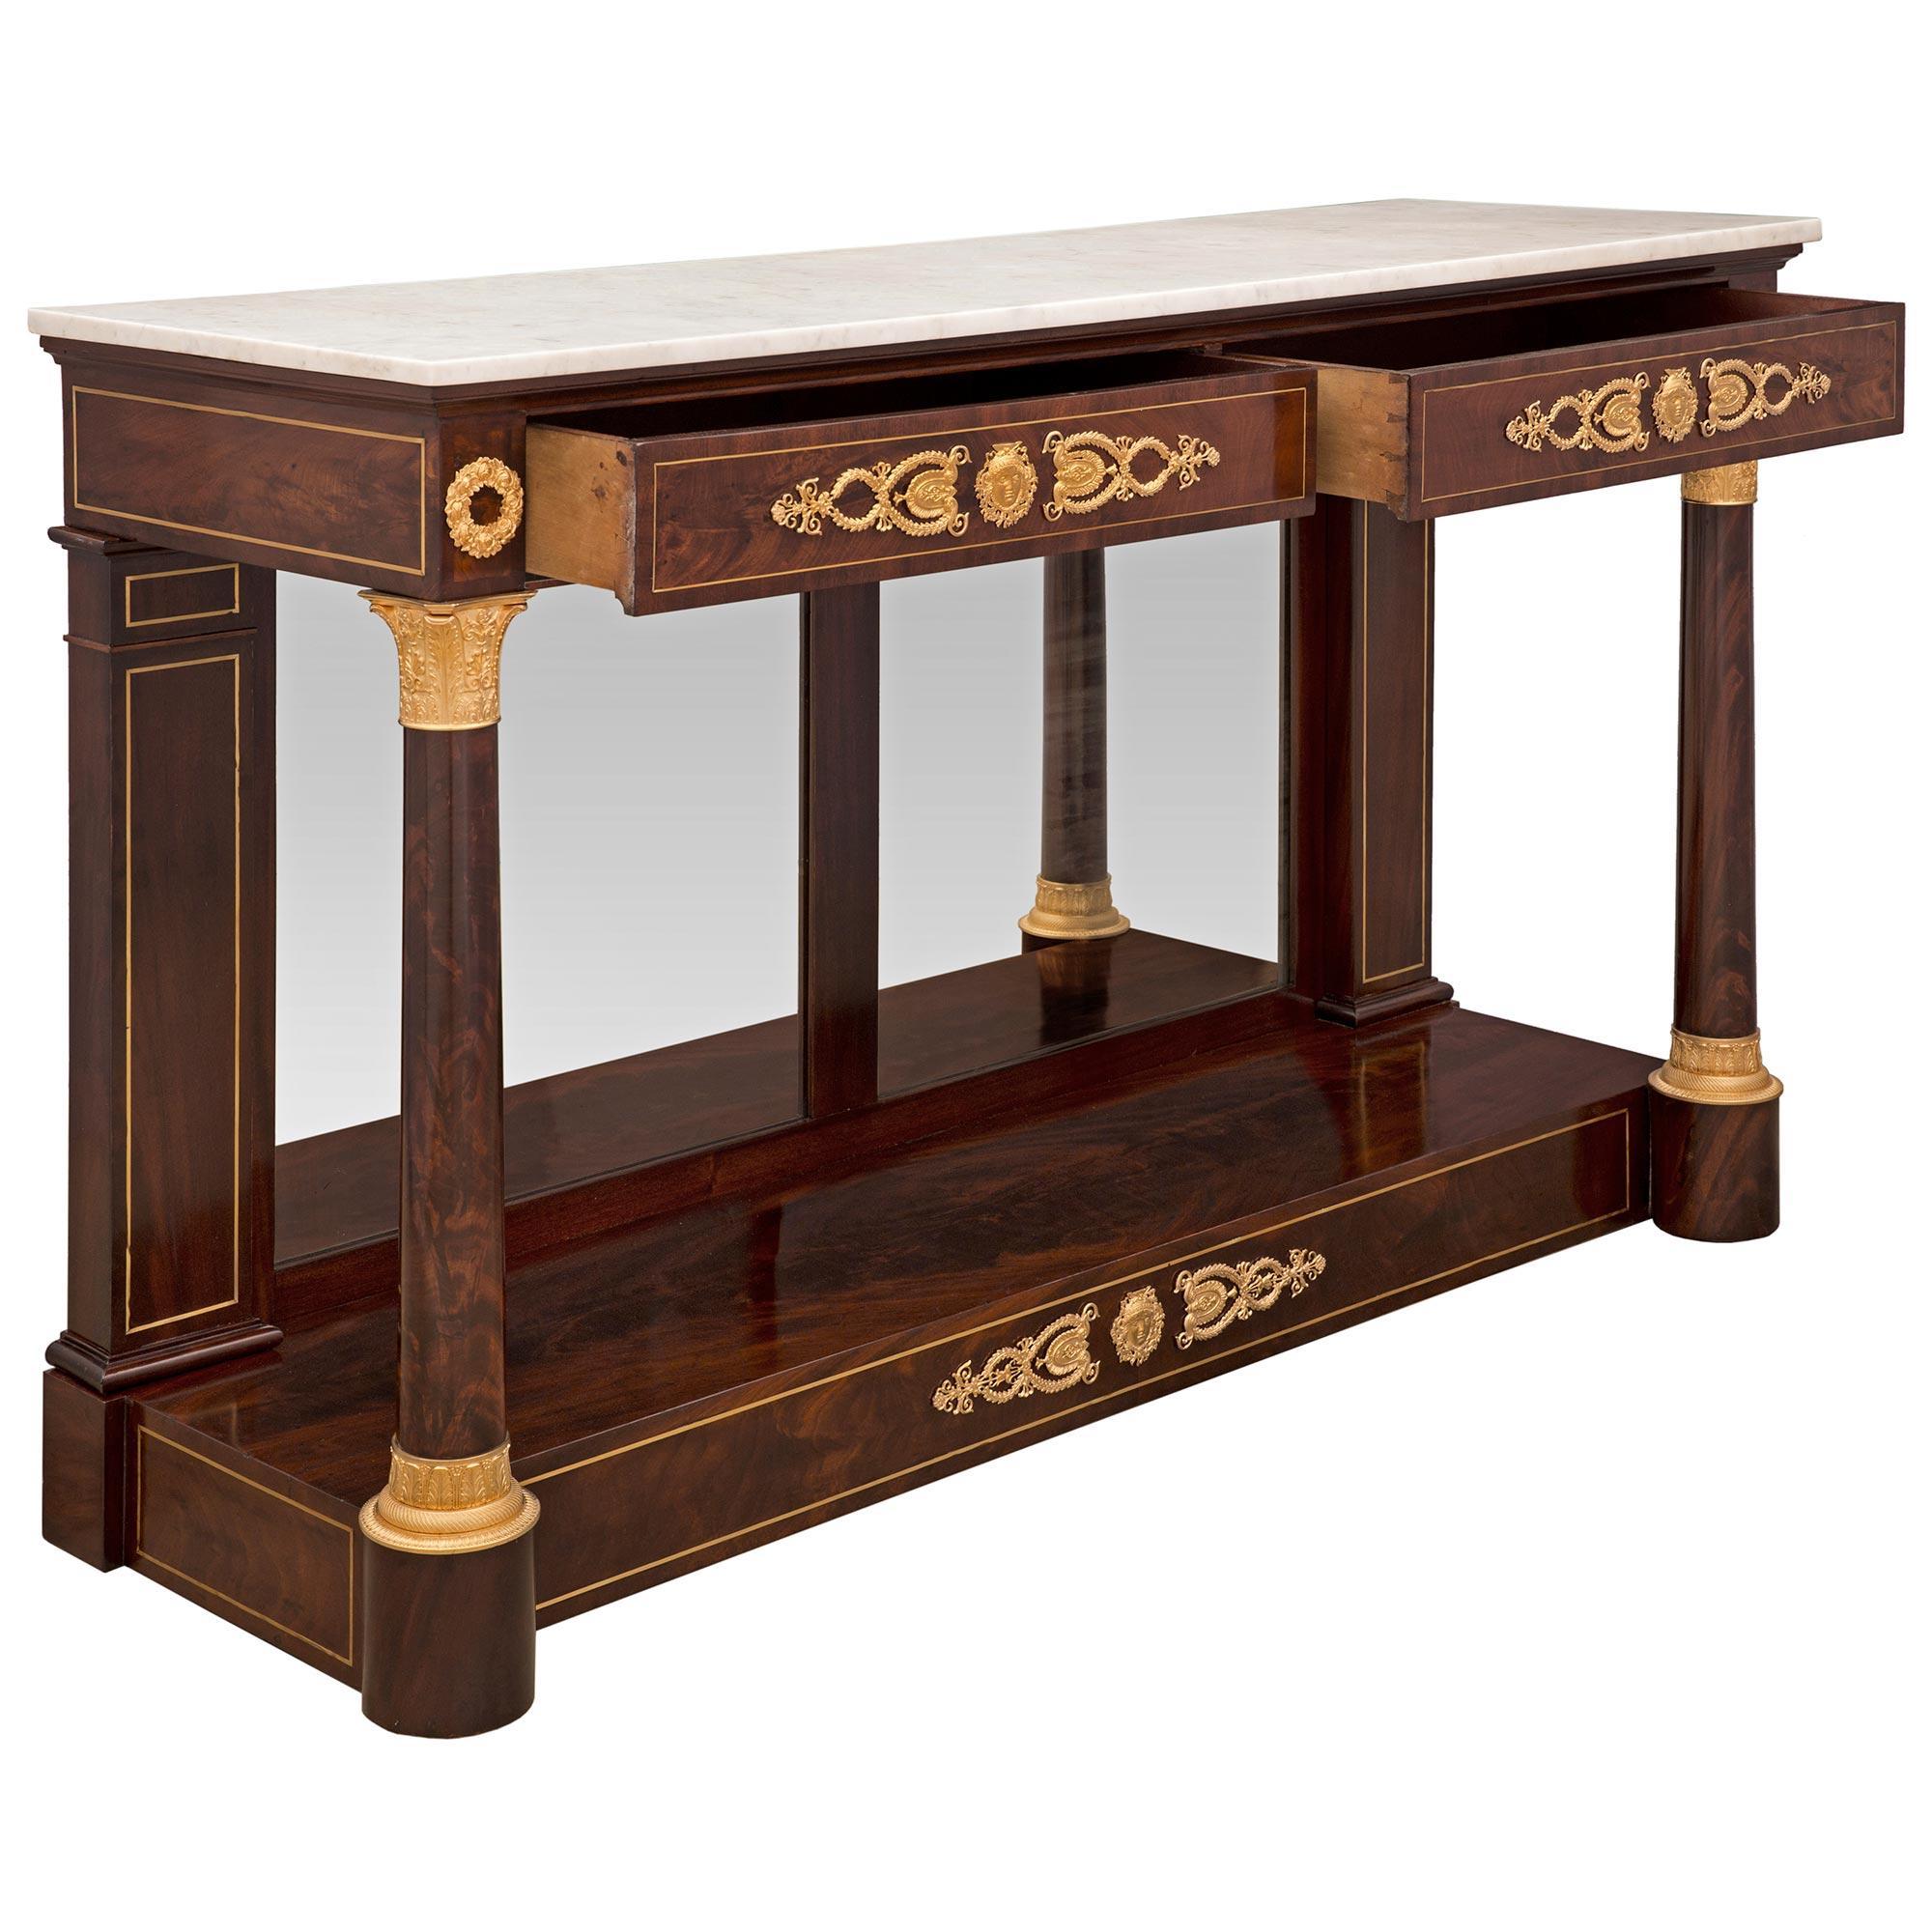 French 19th Century 1st Empire Period Mahogany, Marble, and Ormolu Console For Sale 1